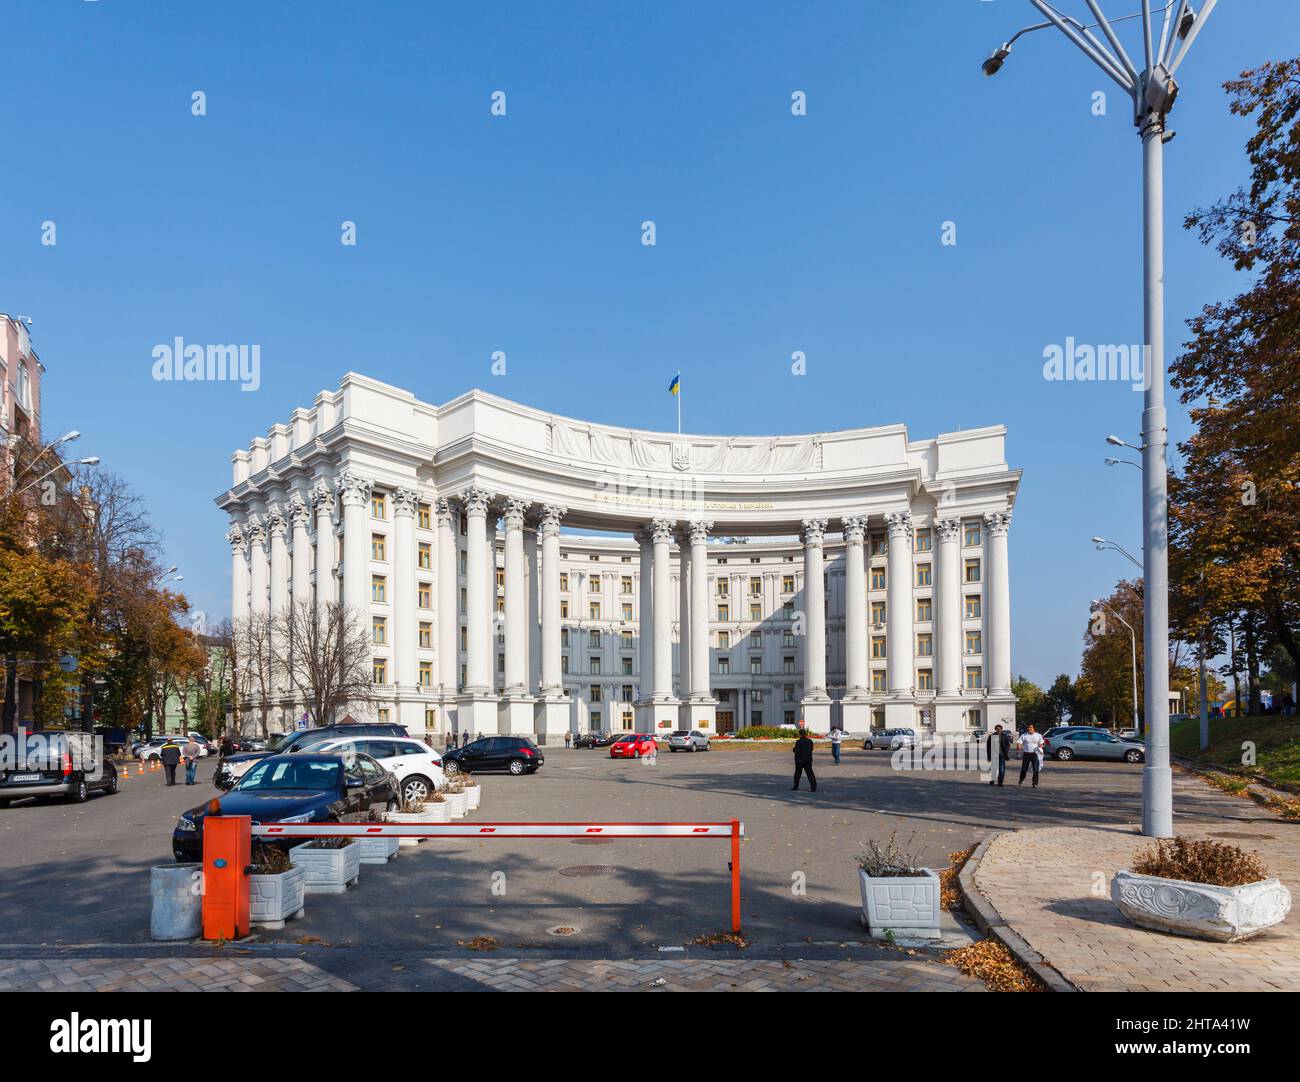 The Stalinist architecture Ministry of Foreign Affairs building in the historic Upper Town District of Old Kiev (Kyiv), capital city of Ukraine Stock Photo